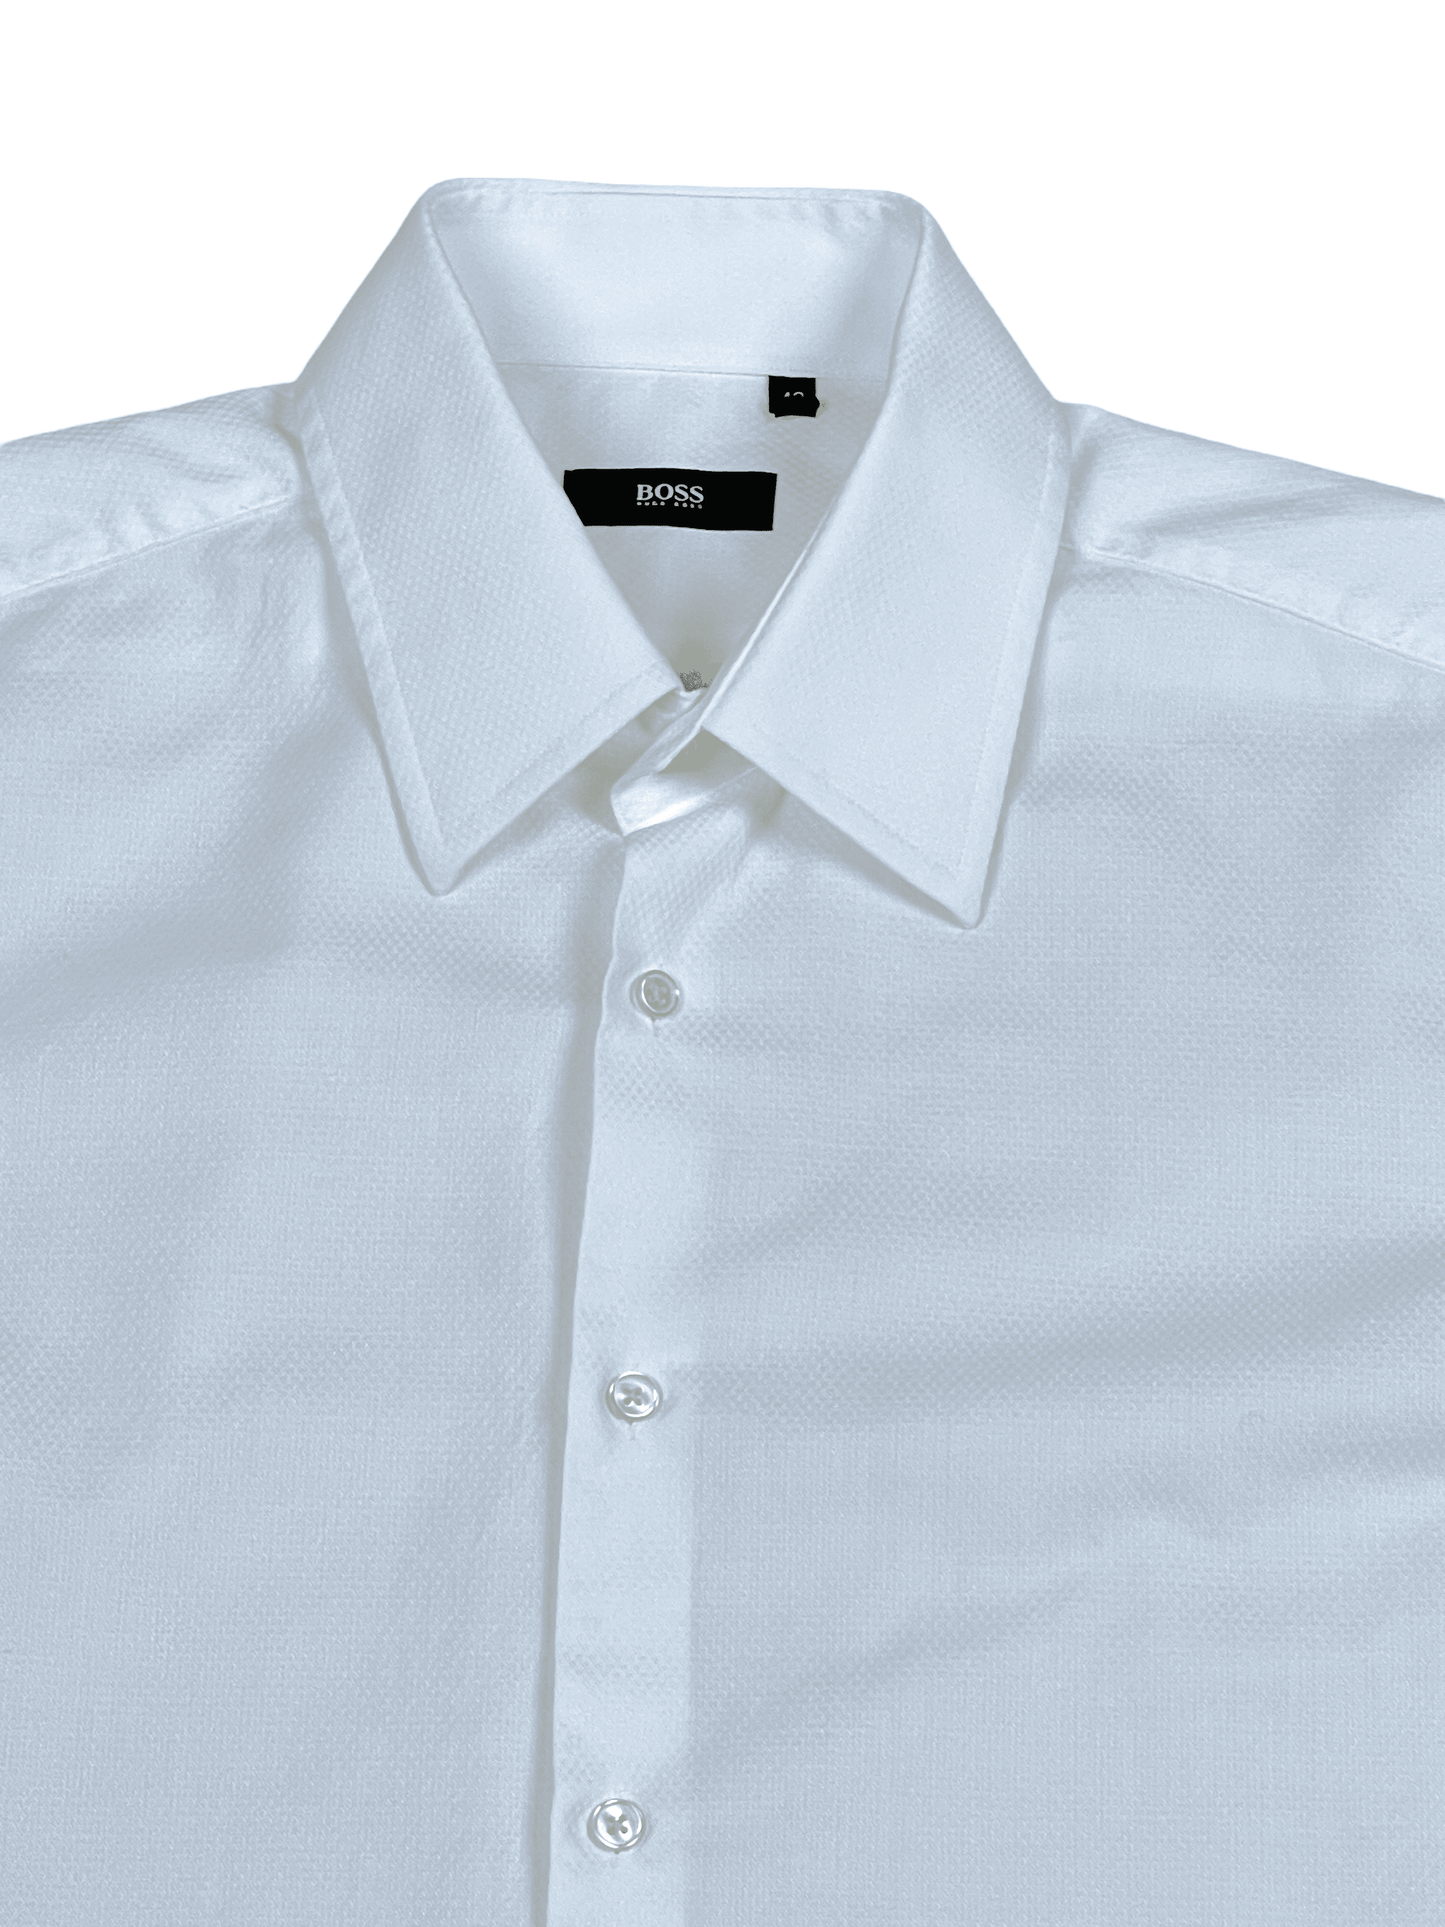 Hugo Boss White Dress Shirt 16.5 / 42 - Genuine Design Luxury Consignment for Men. New & Pre-Owned Clothing, Shoes, & Accessories. Calgary, Canada